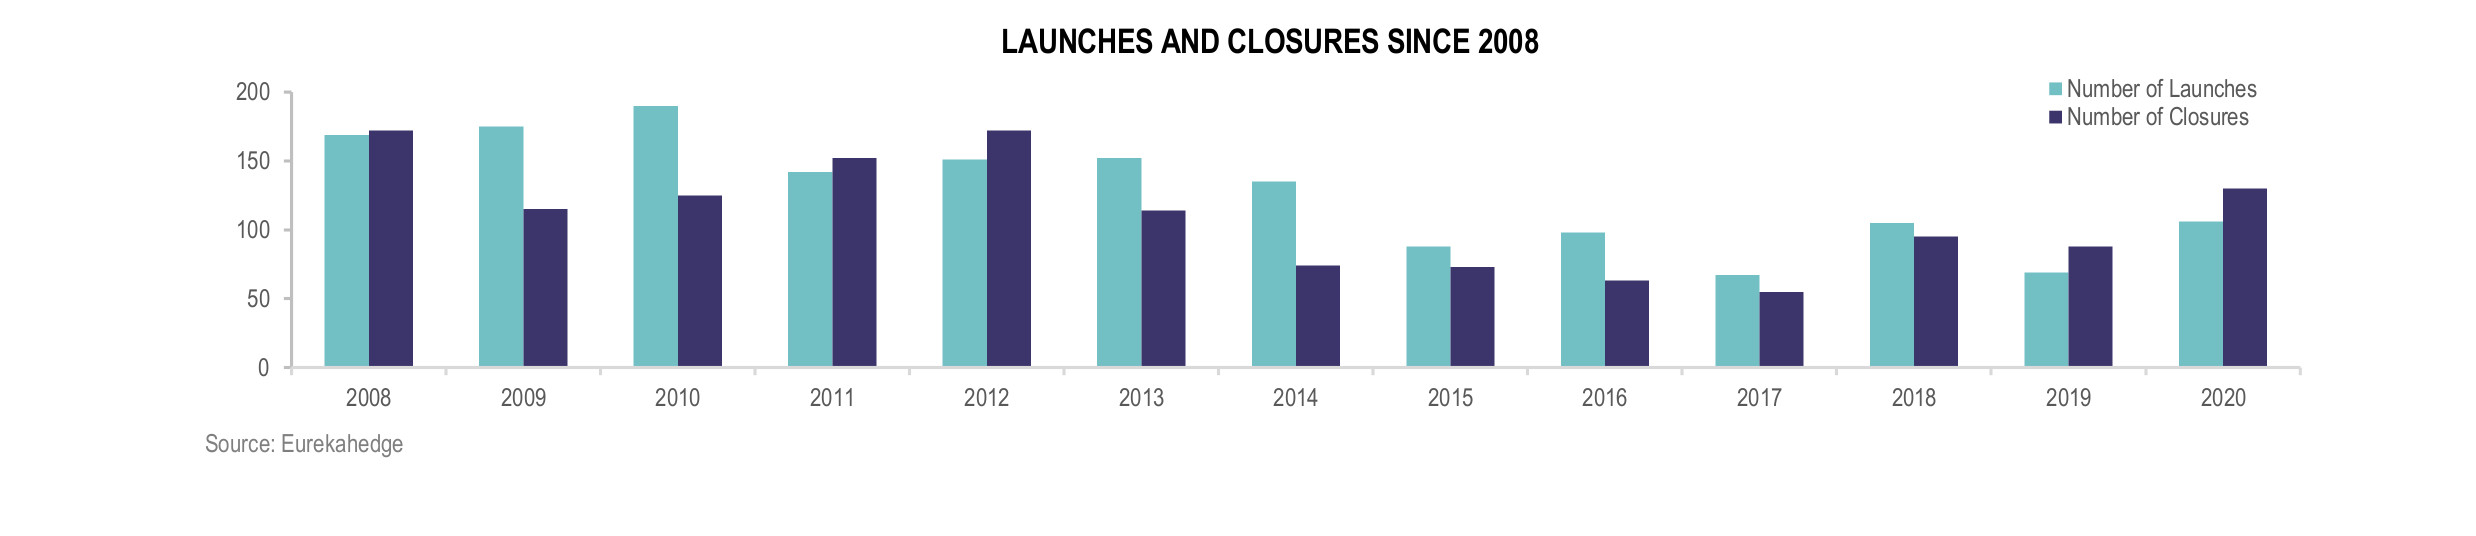 Asian Hedge Funds Infographic February 2021 - Launches and Closures